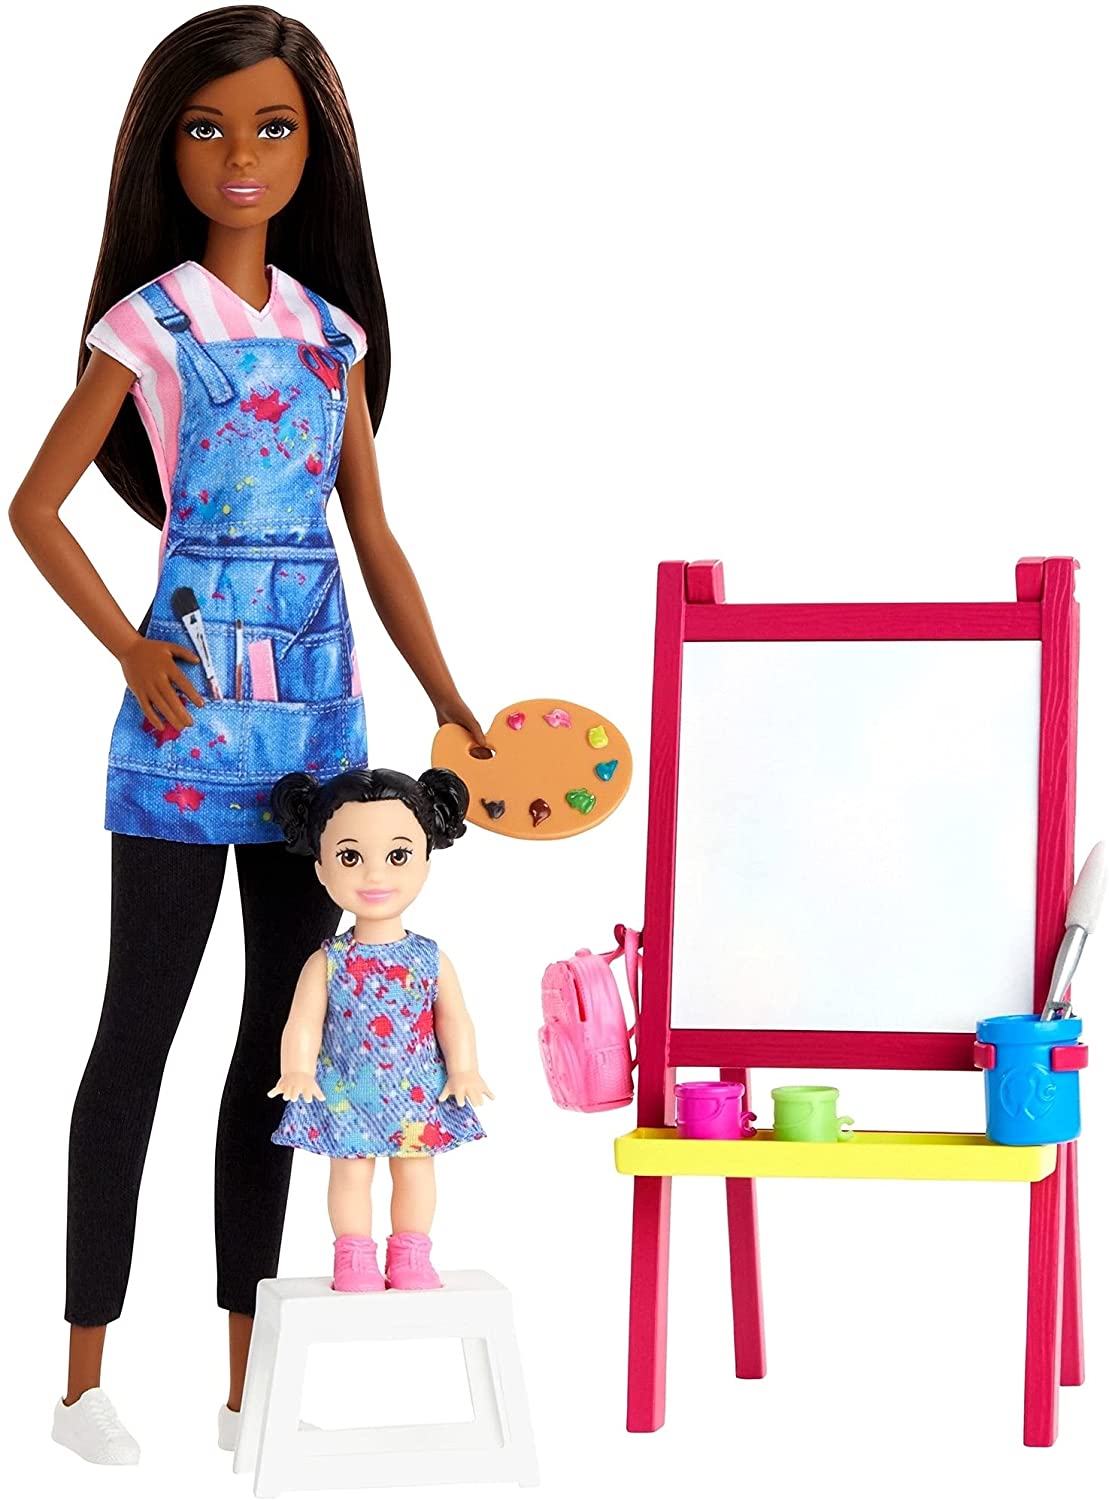 Barbie Art Teacher Playset with Brunette Doll w/ Accessories $10 + Free Shipping w/ Prime or on orders $25+